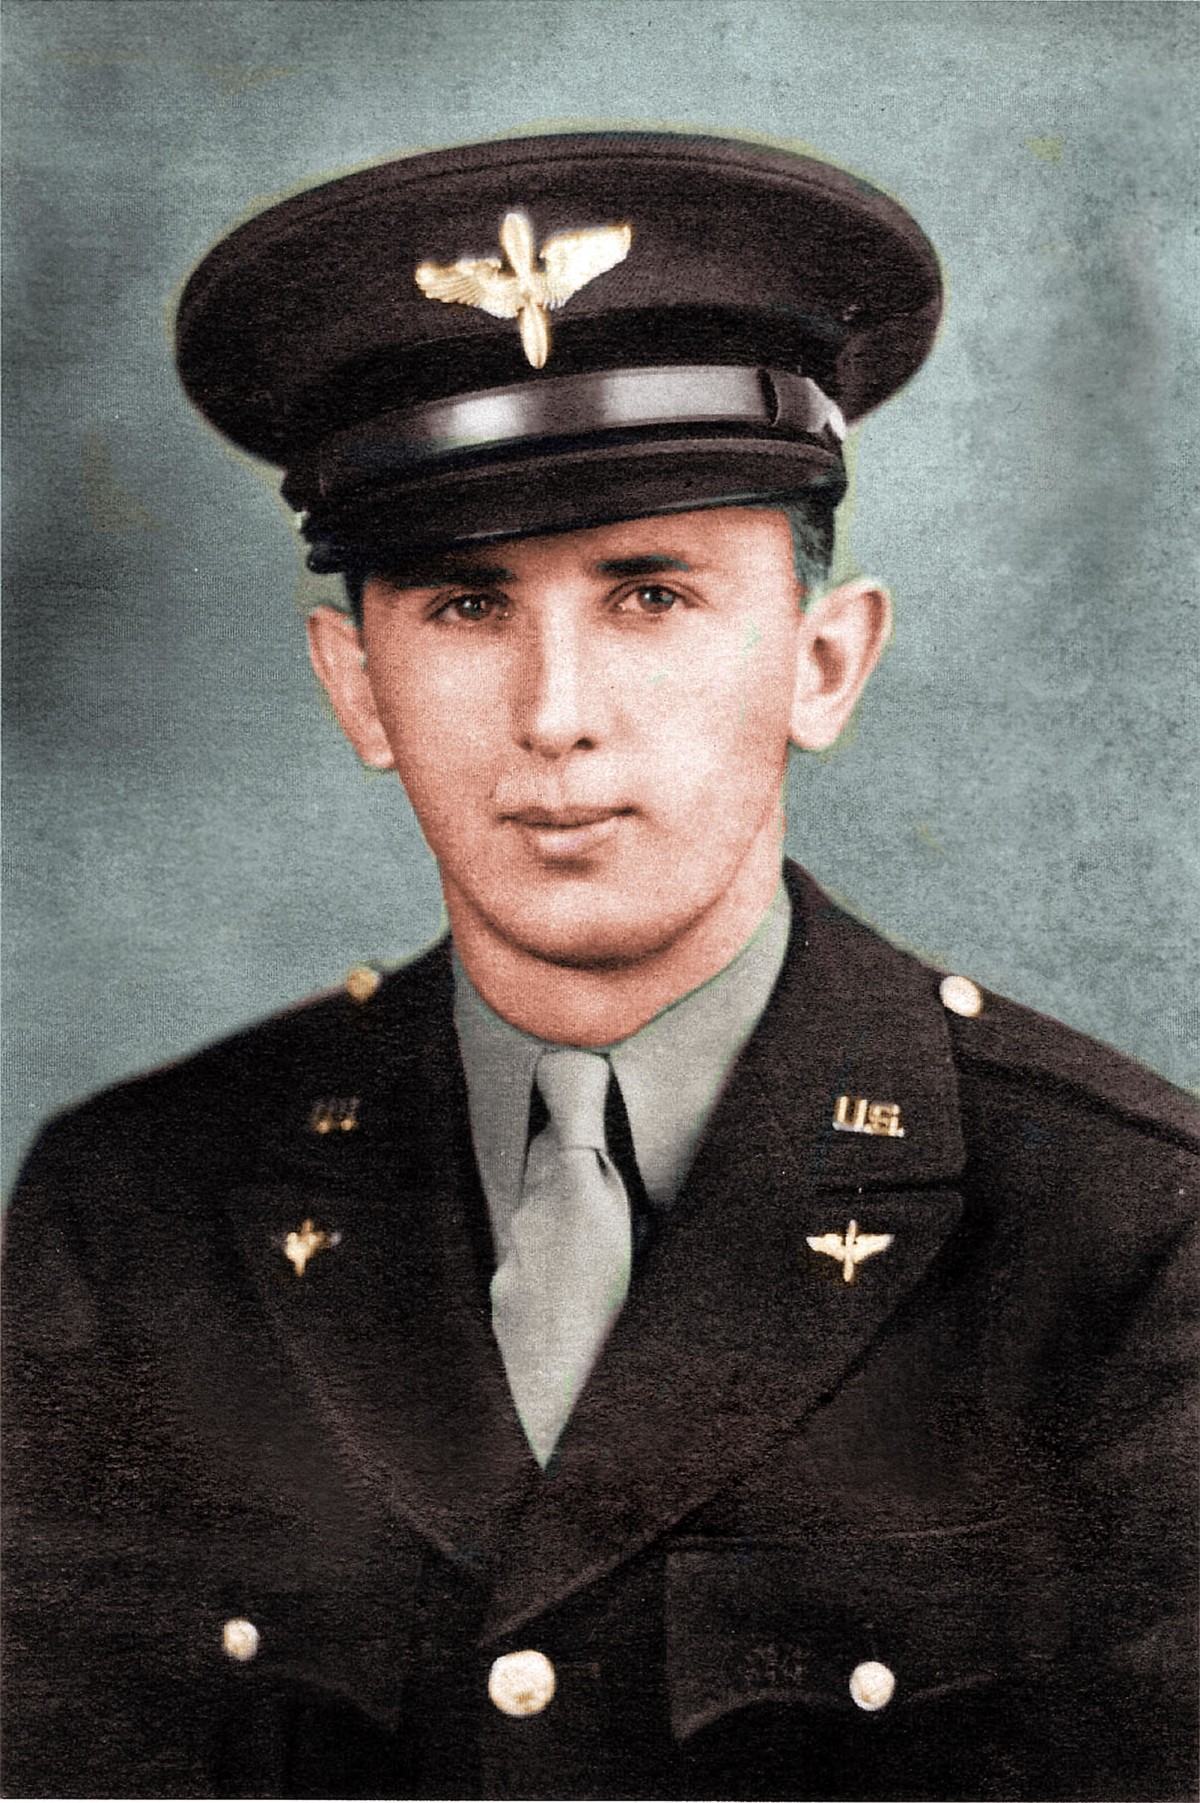 ED HORN CADET Colorized